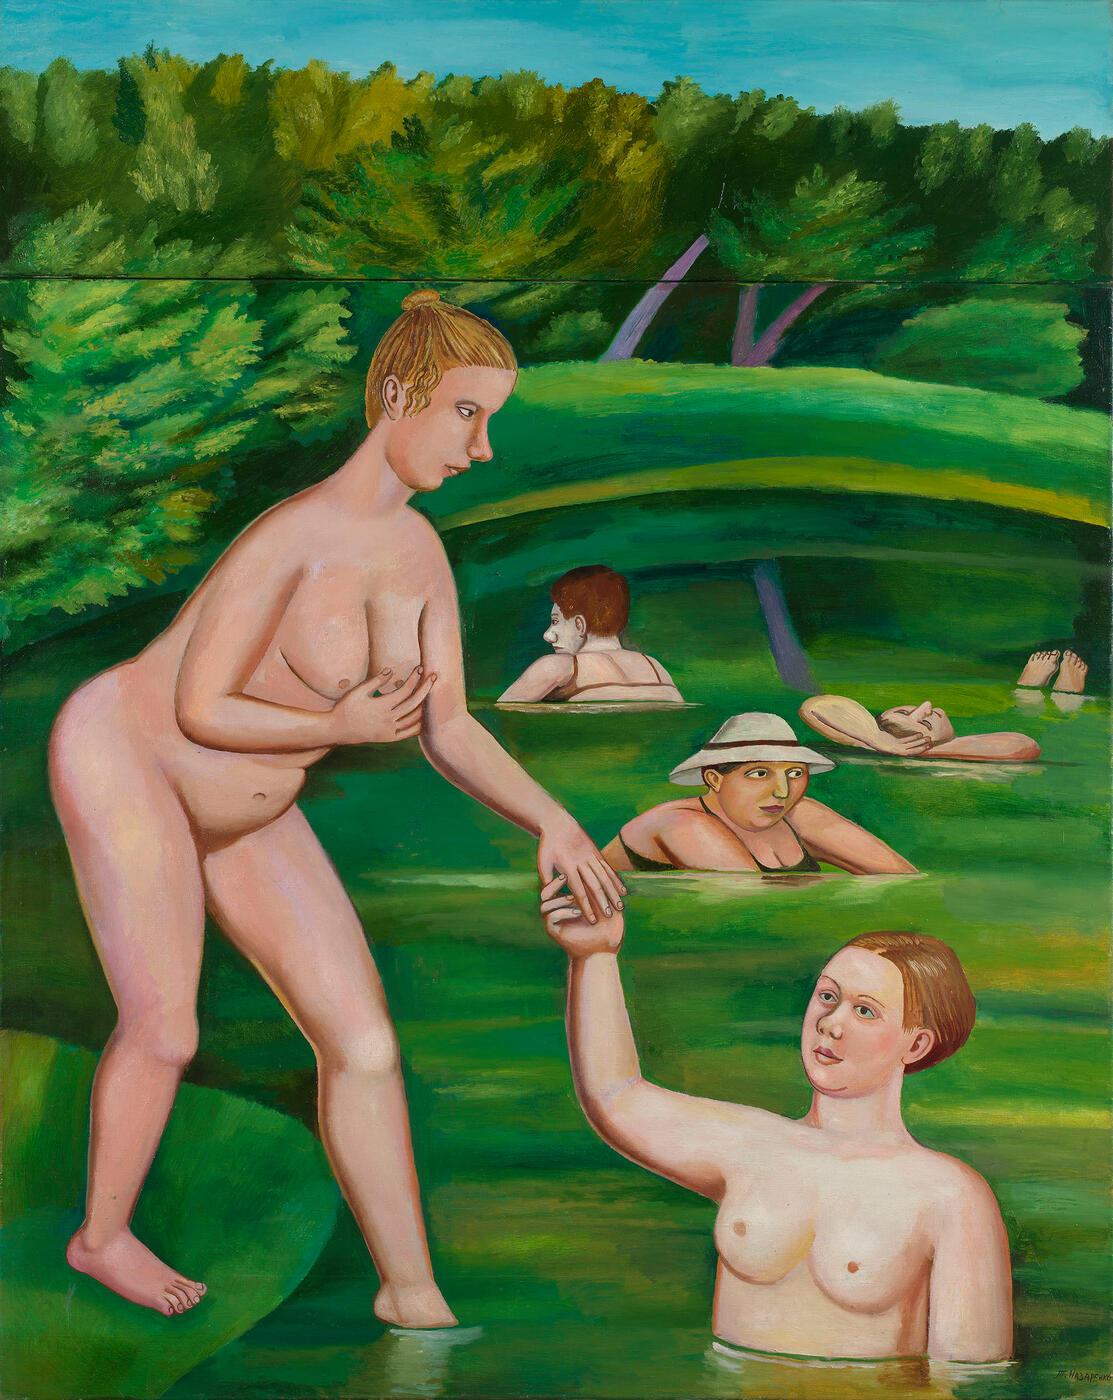 Bathers on the Village Pond, two-part work